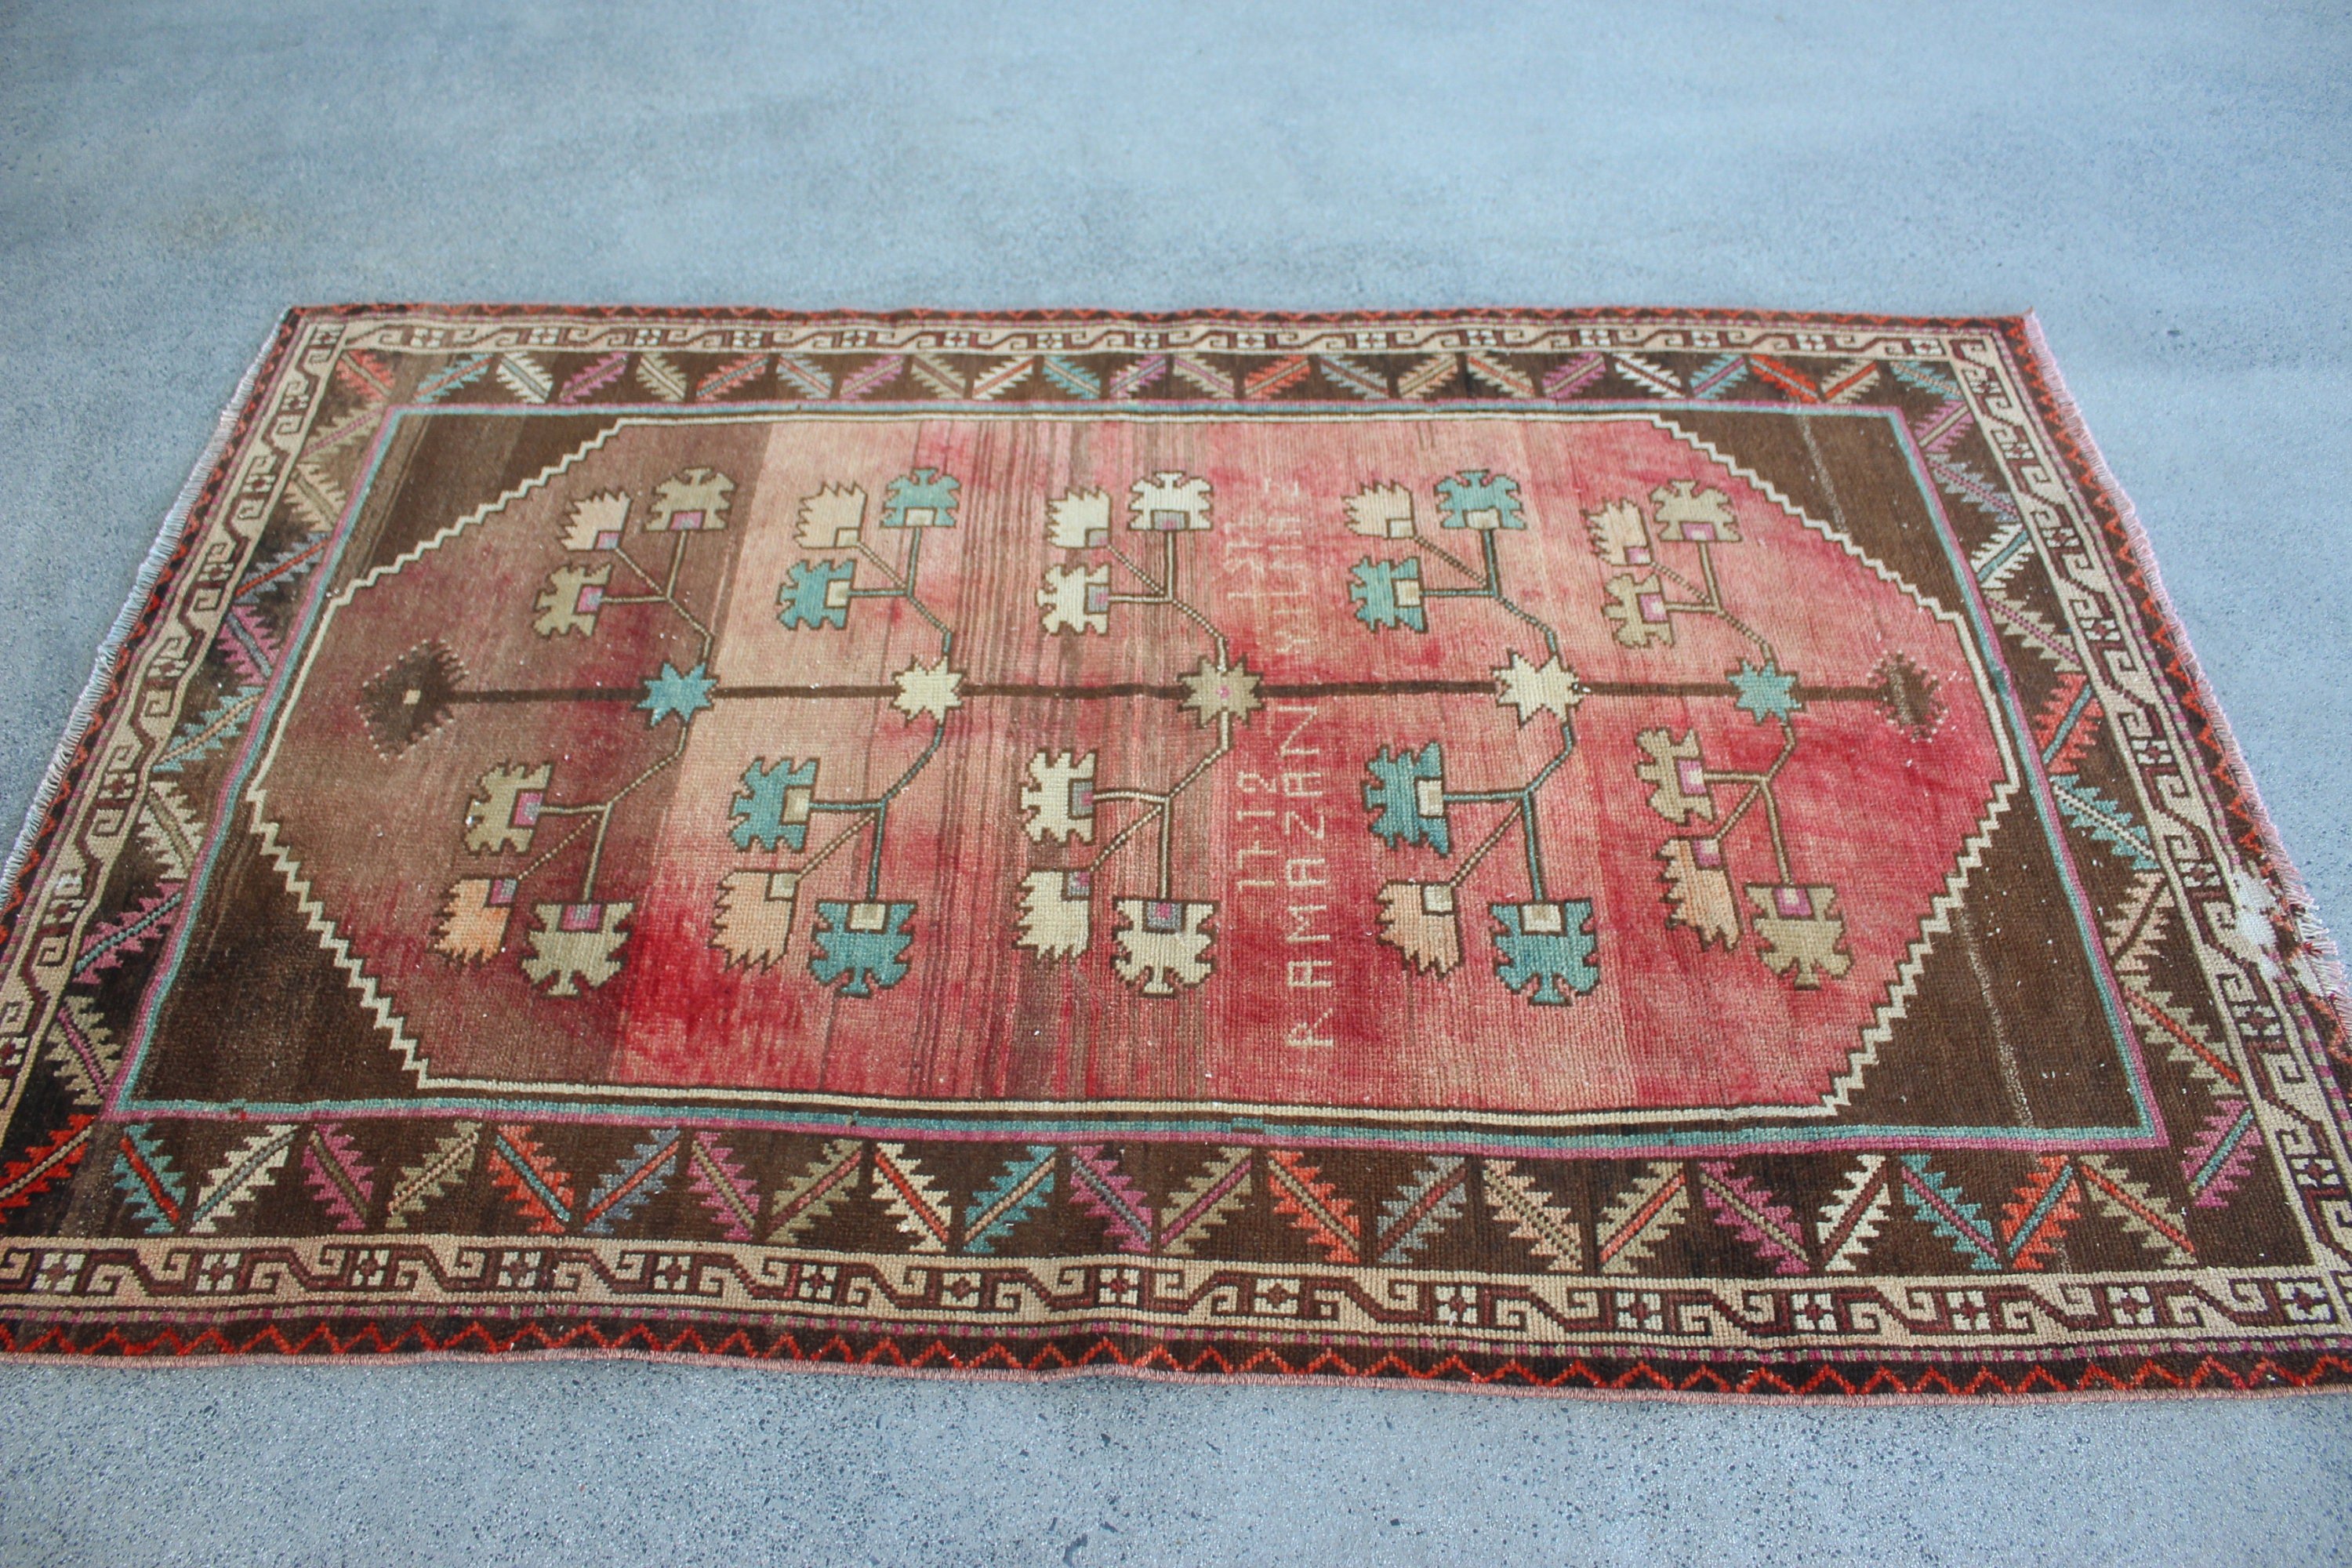 Nursery Rugs, Red  4x6.4 ft Area Rug, Cool Rug, Vintage Rugs, Rugs for Kitchen, Turkish Rugs, Bedroom Rug, Kitchen Rugs